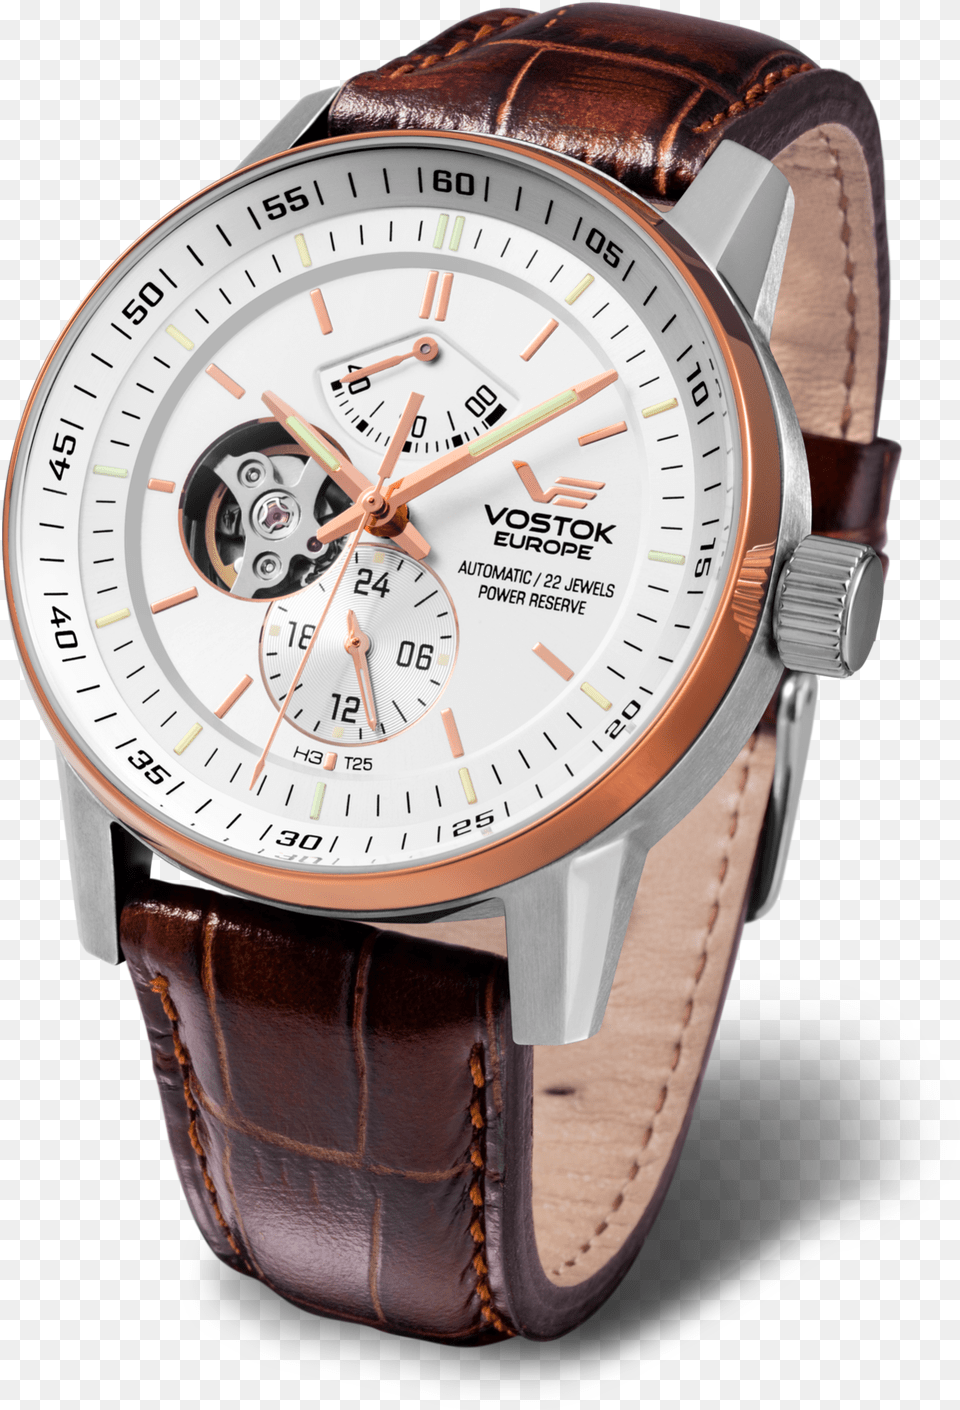 Vostok Europe Watches Manufacture Yn84 565e550b, Arm, Body Part, Person, Wristwatch Png Image